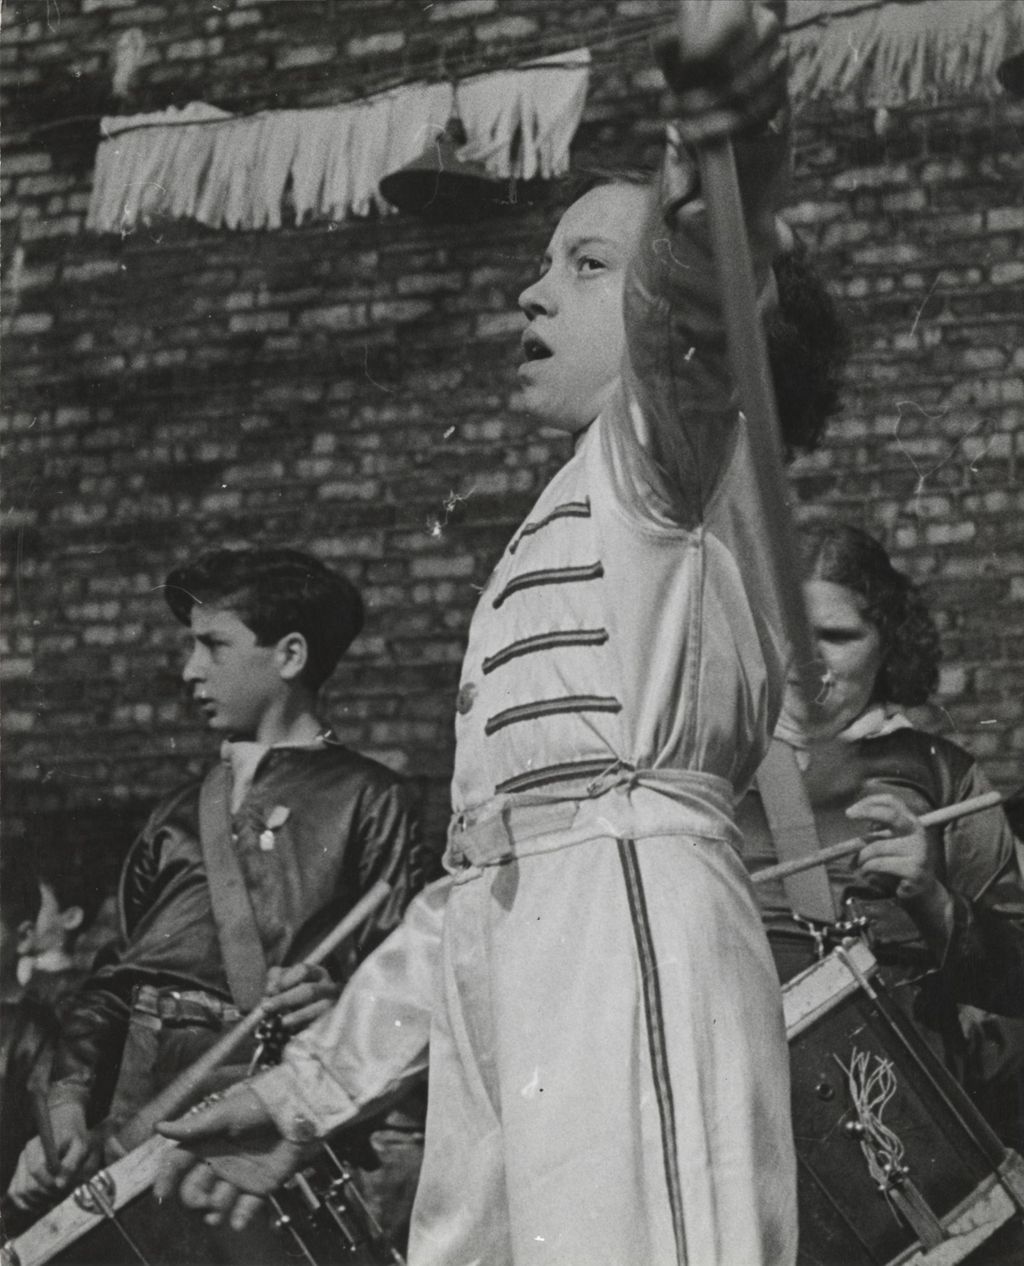 Miniature of Drum major and two drummers performing on stage in the Mary Crane Nursery courtyard as part of Hull-House 50th Anniversary circus show